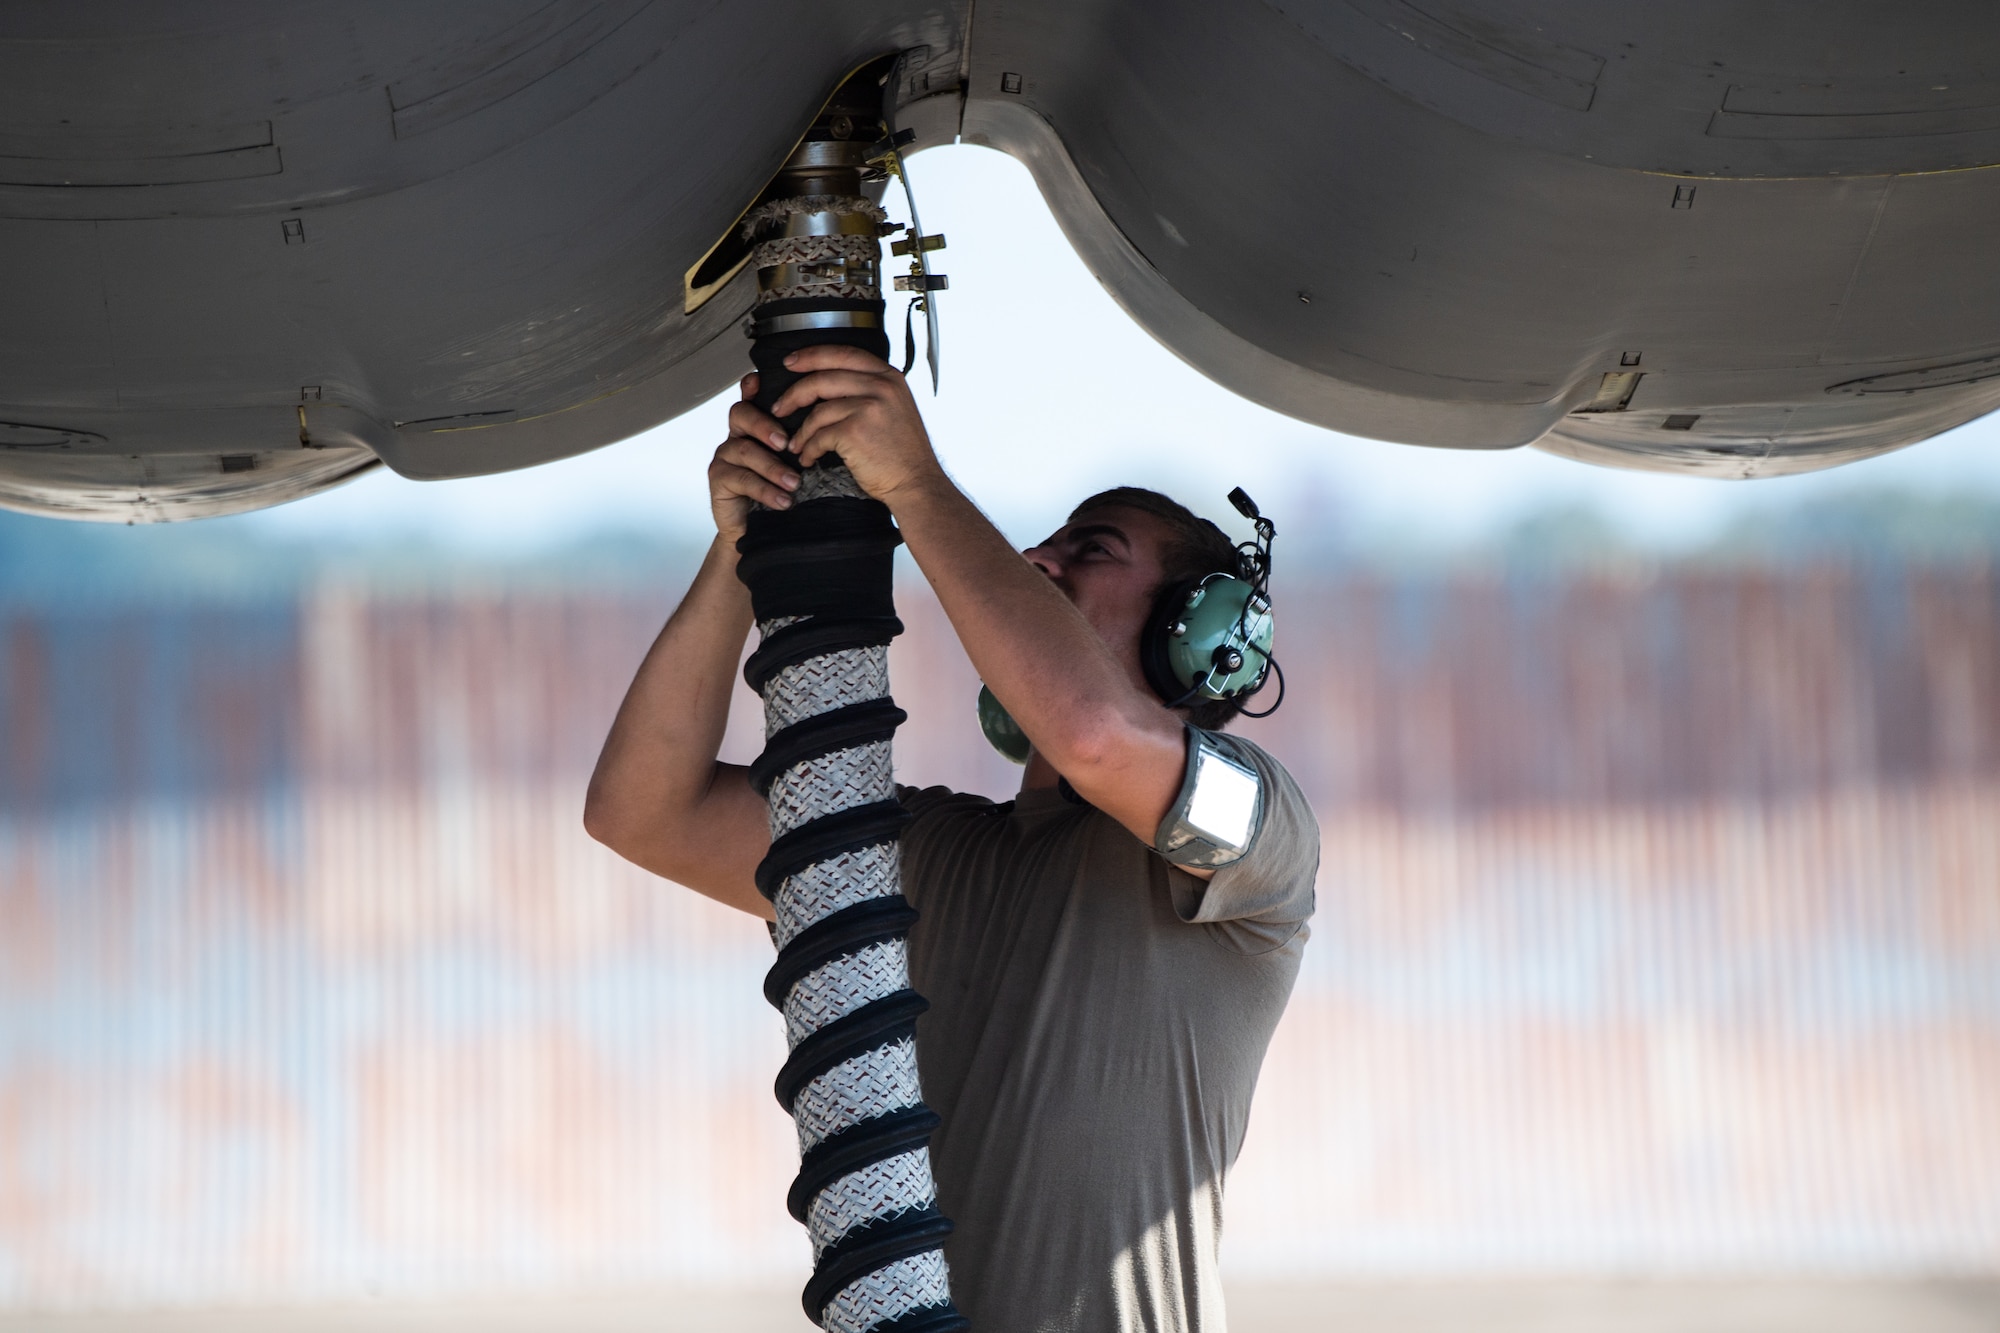 Airman 1st Class Nicholas Casillas, 96th Aircraft Maintenance Unit crew chief, detaches a fuel hose from a B-52H Stratofortress during Global Thunder 21 at Barksdale Air Force Base, La., Oct. 22, 2020.